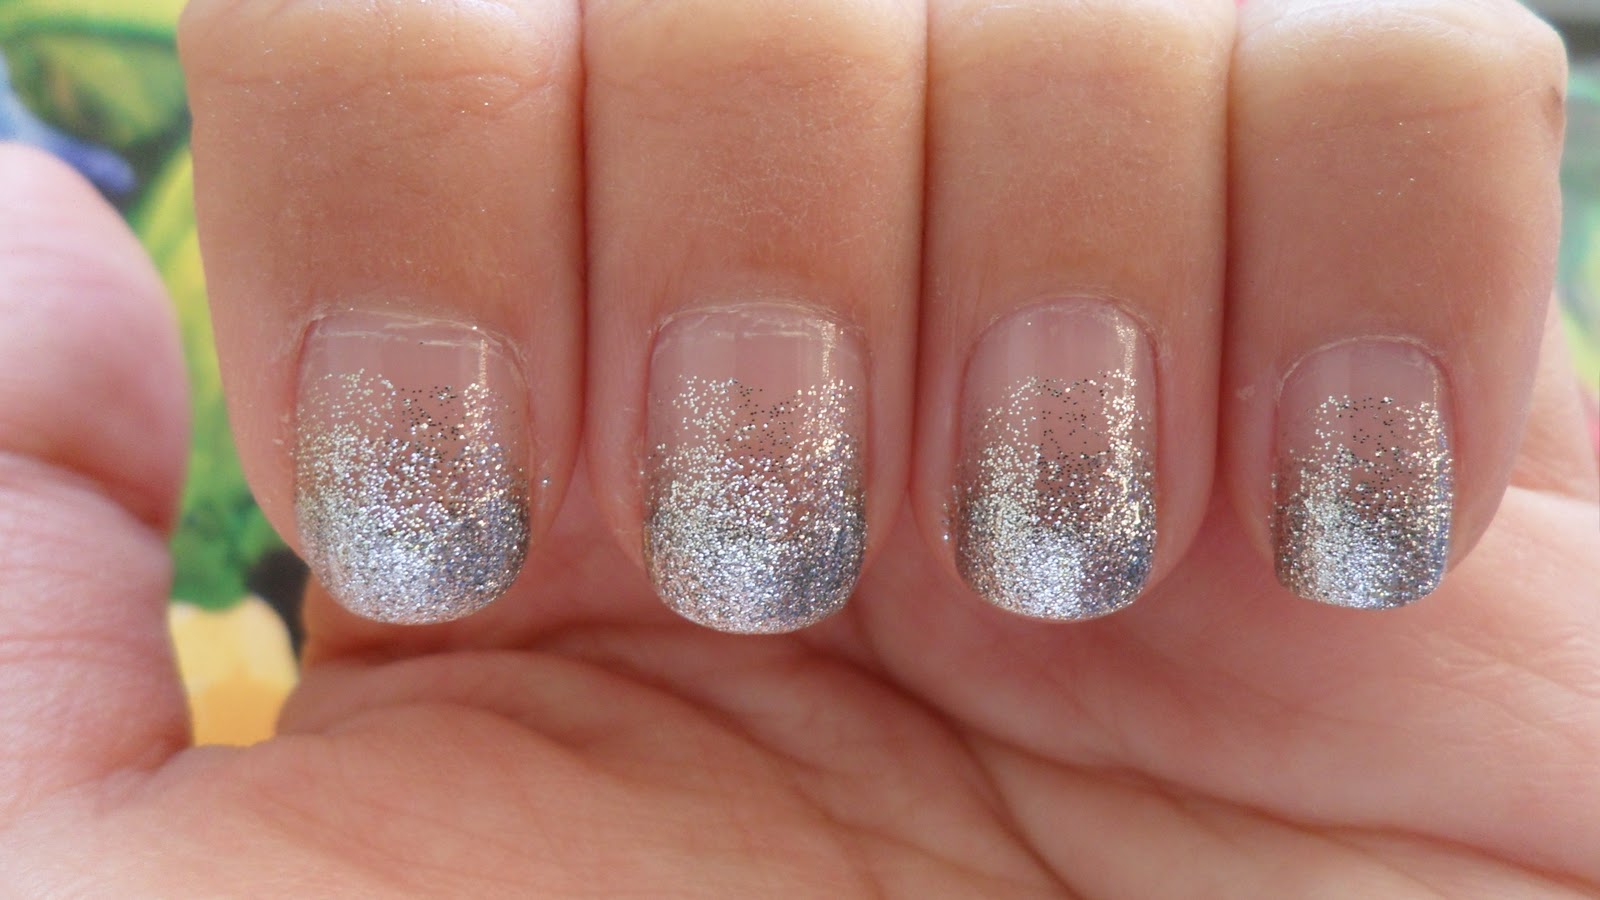 Will Work for Makeup: Glittery Gradient Nails